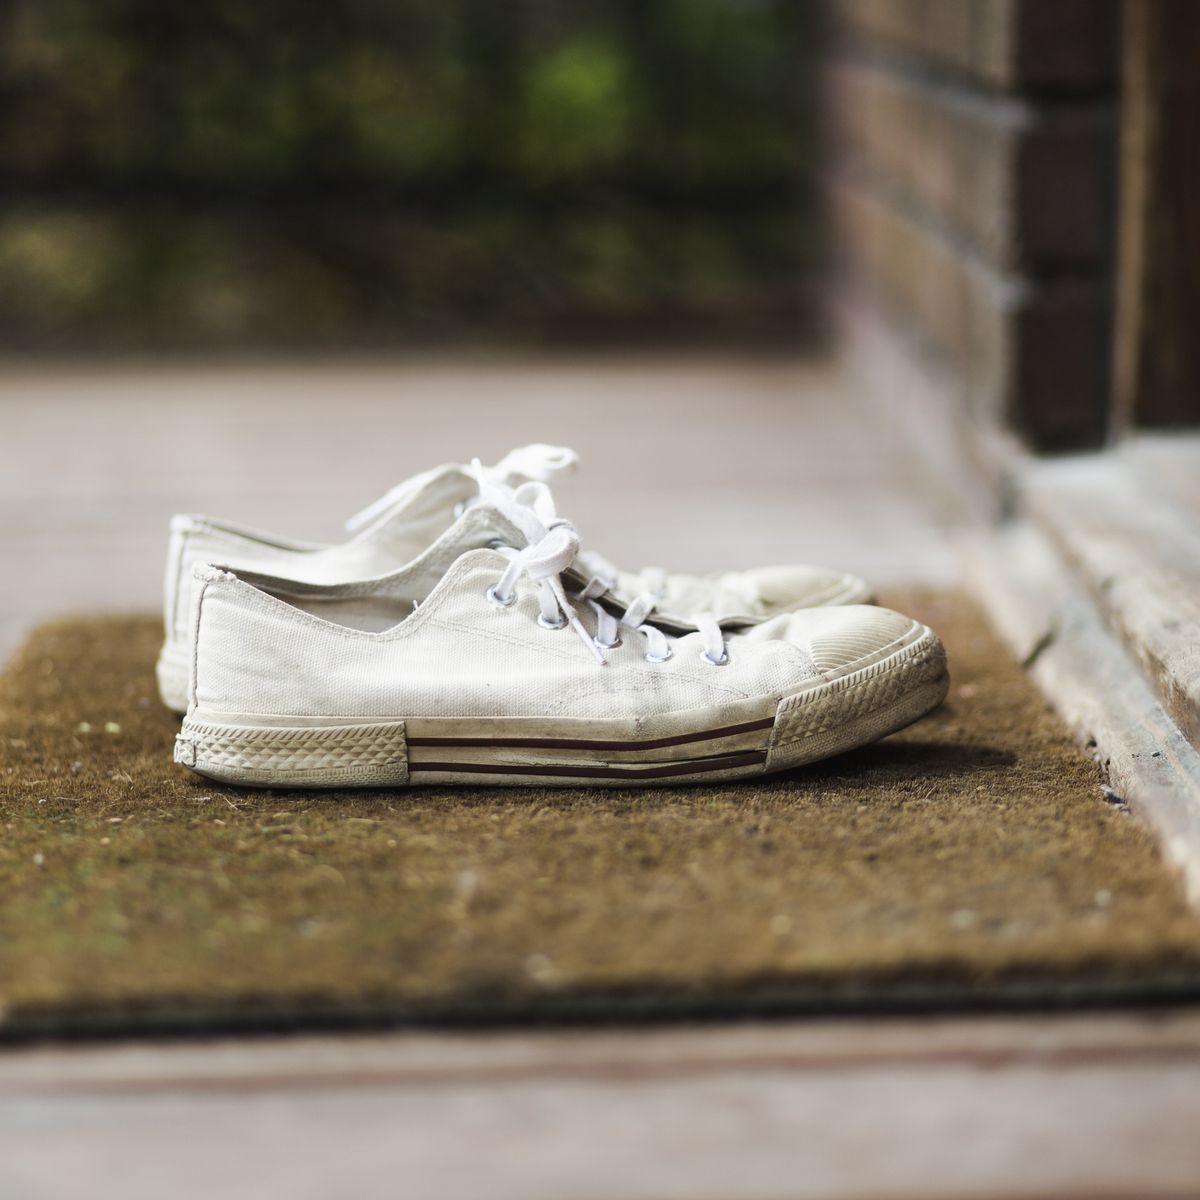 How To Clean White Vans So They Look Brand New: The Best 7 Methods